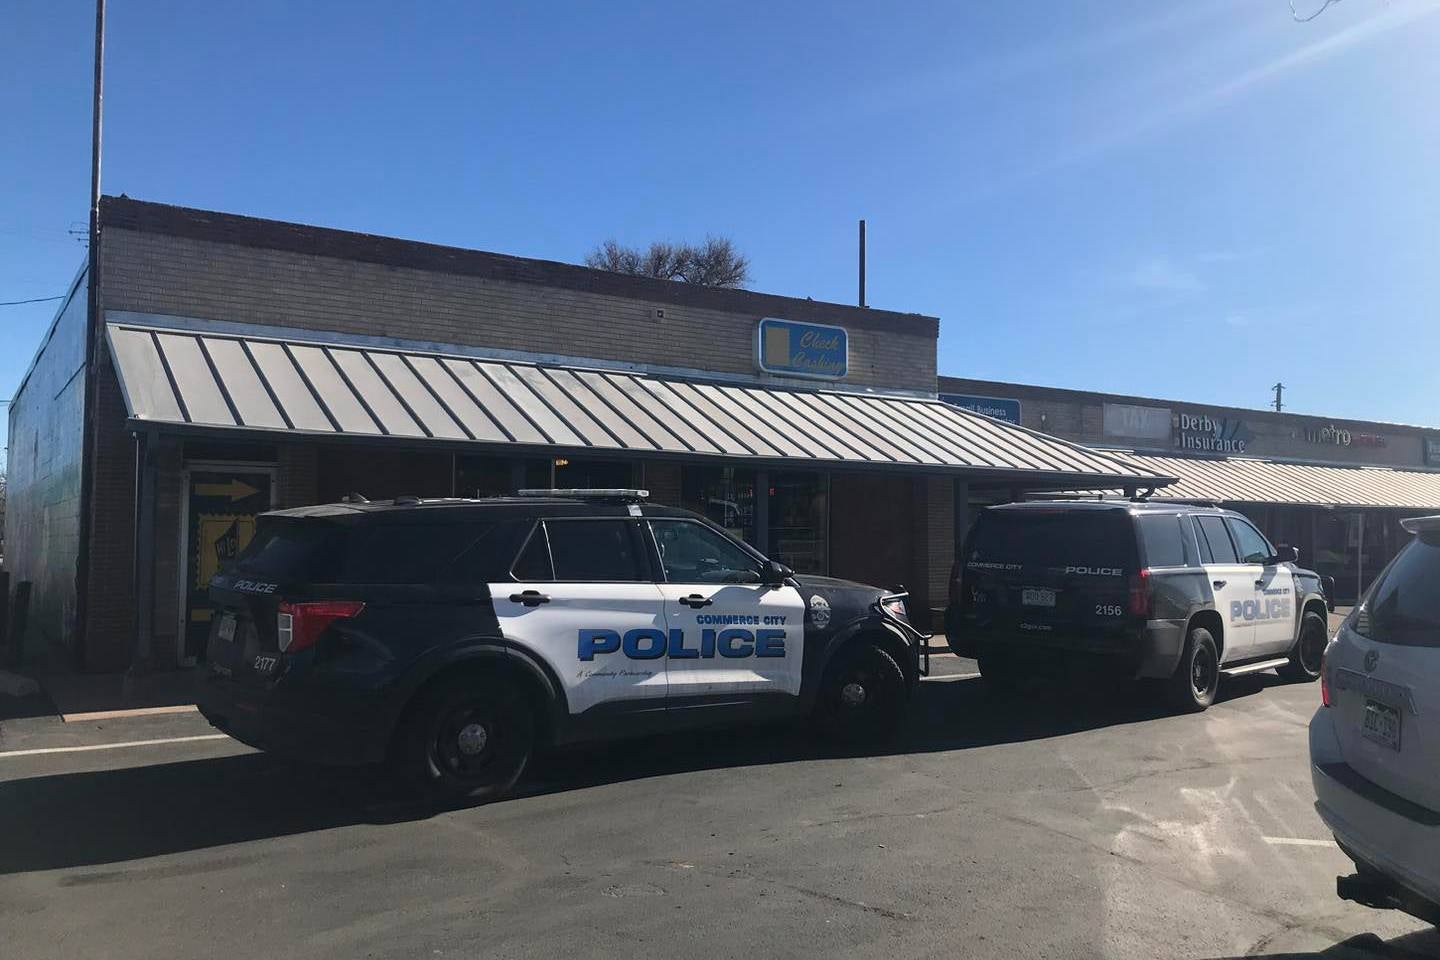 A gang of armed thieves were in the midst of robbing a Colorado check-cashing business when their getaway car was stolen.